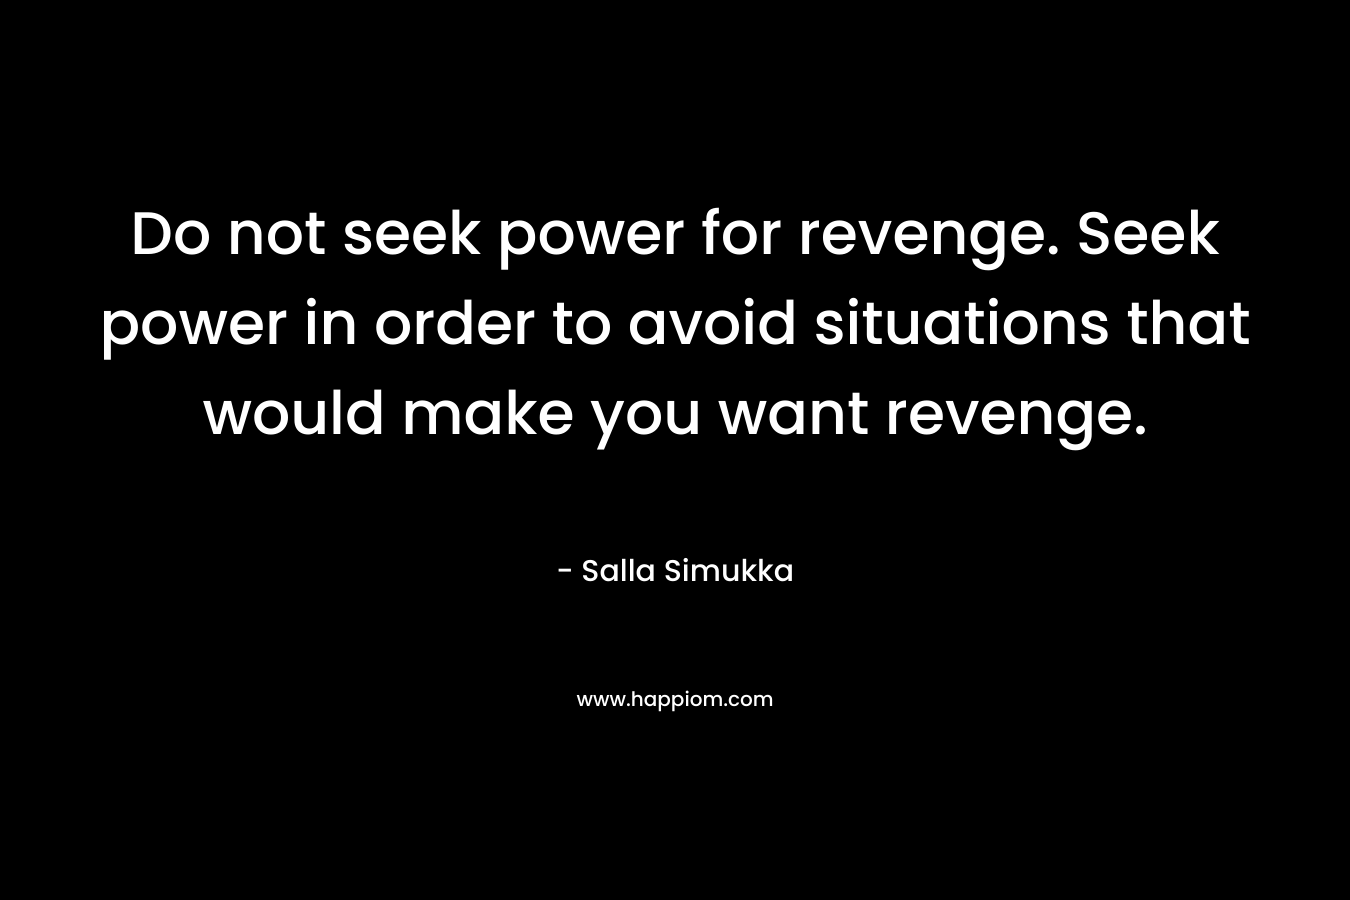 Do not seek power for revenge. Seek power in order to avoid situations that would make you want revenge.